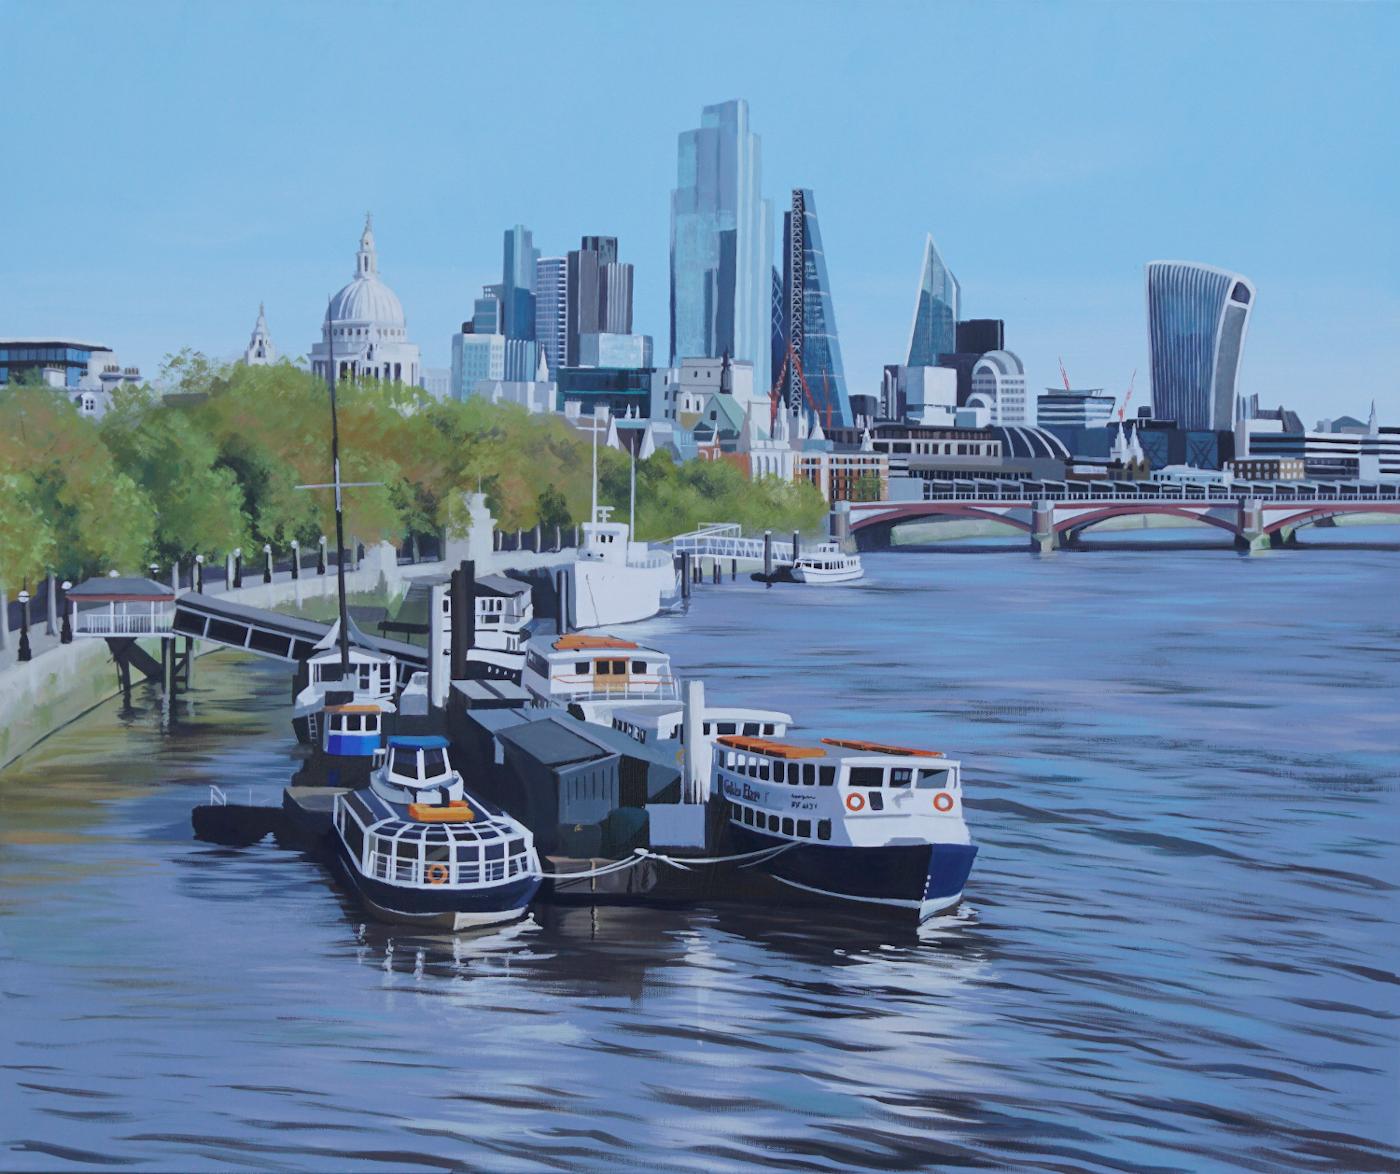 Jo Quigley Landscape Painting - The City from Waterloo Bridge, Realist Style Cityscape Painting, London Art